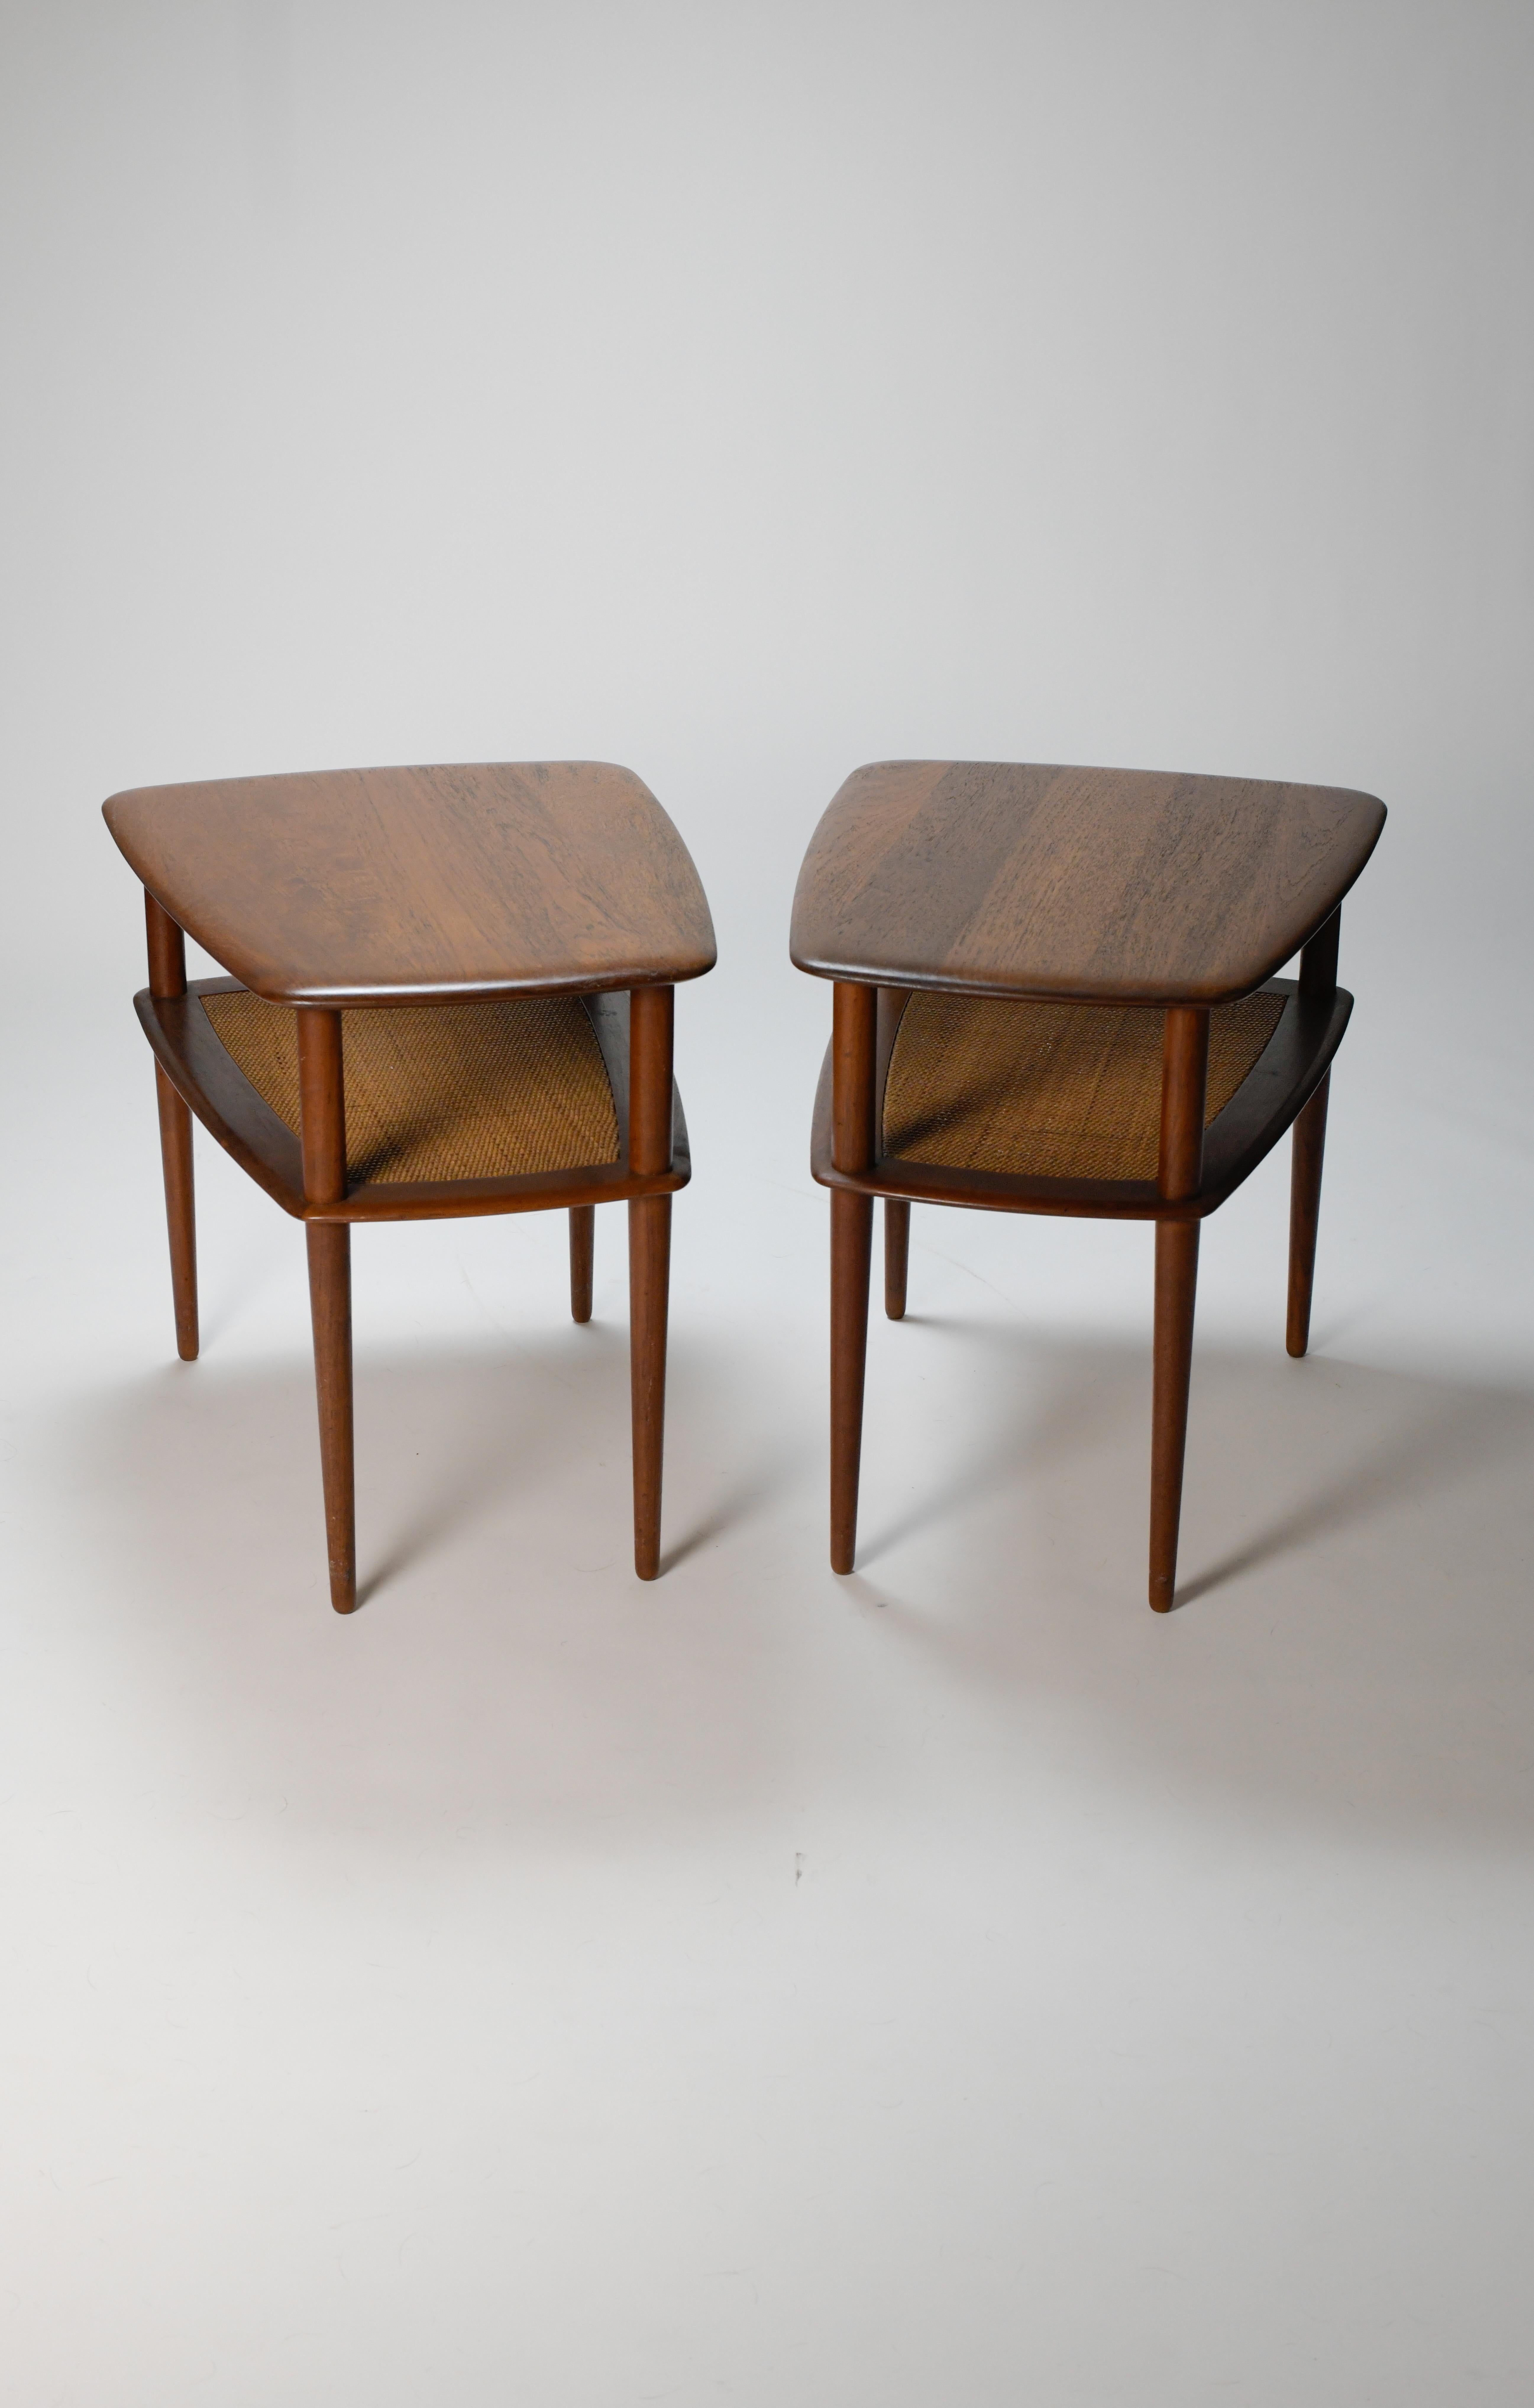 Really nice pair of the classic two tier side table designed by Peter Hvidt and Oral Molgaard Nielsen for France & Son. This asymmetrical table has an upper surface in teak with a lower shelf in cane. Both shelves on both tables are sturdy and have